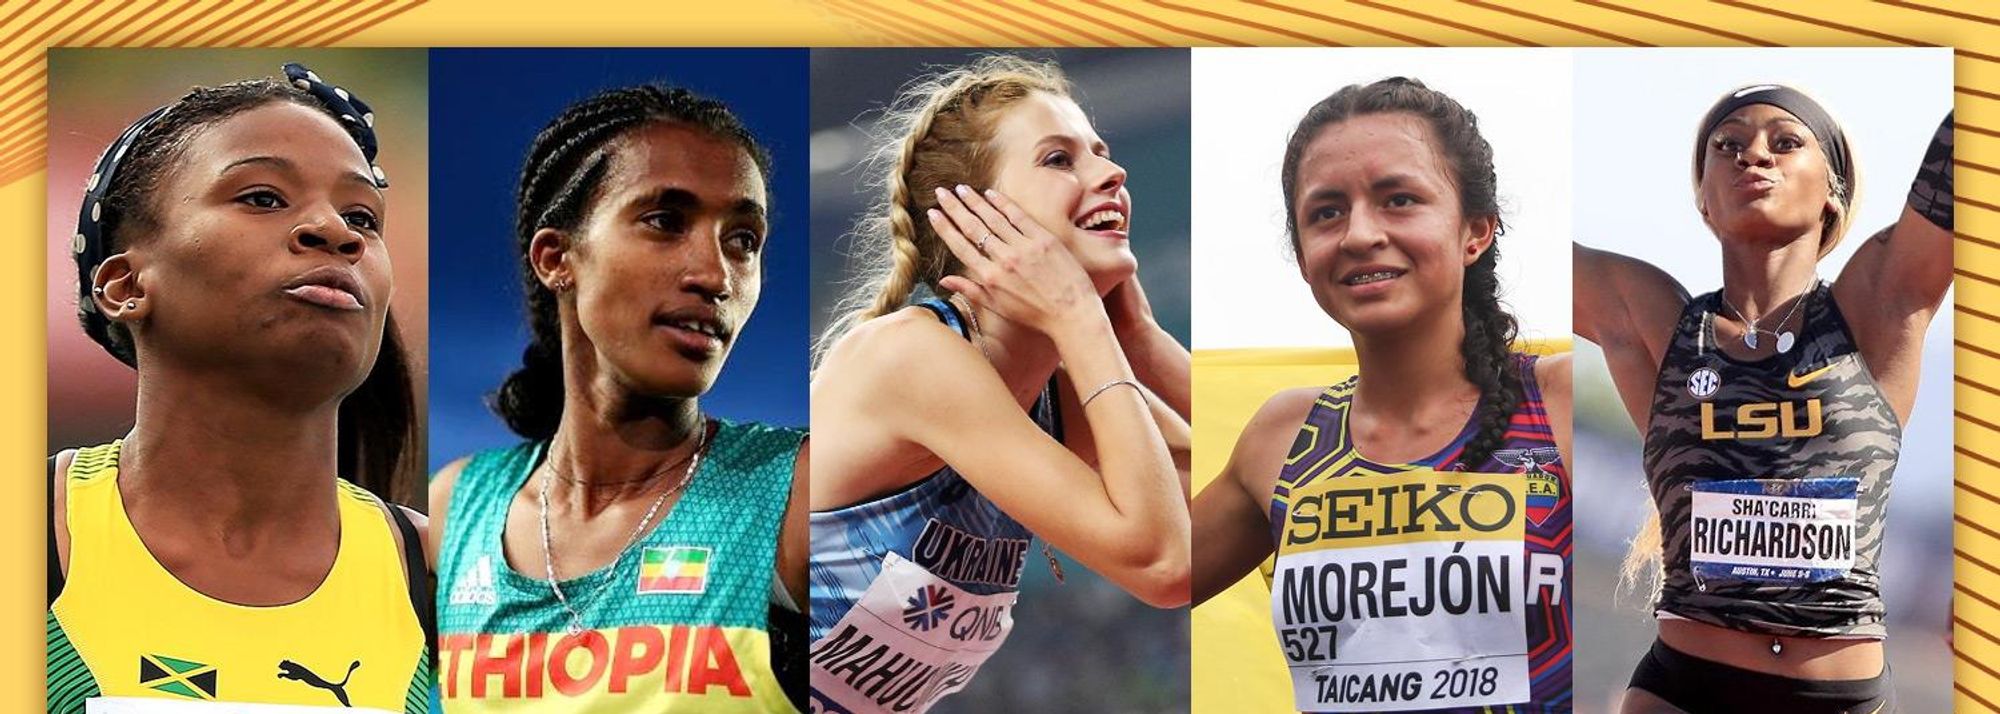 With less than three weeks to go until the World Athletics Awards 2019, the IAAF is delighted to announce the five finalists for the 2019 Female Rising Star Award to recognise this year's best U20 athlete.